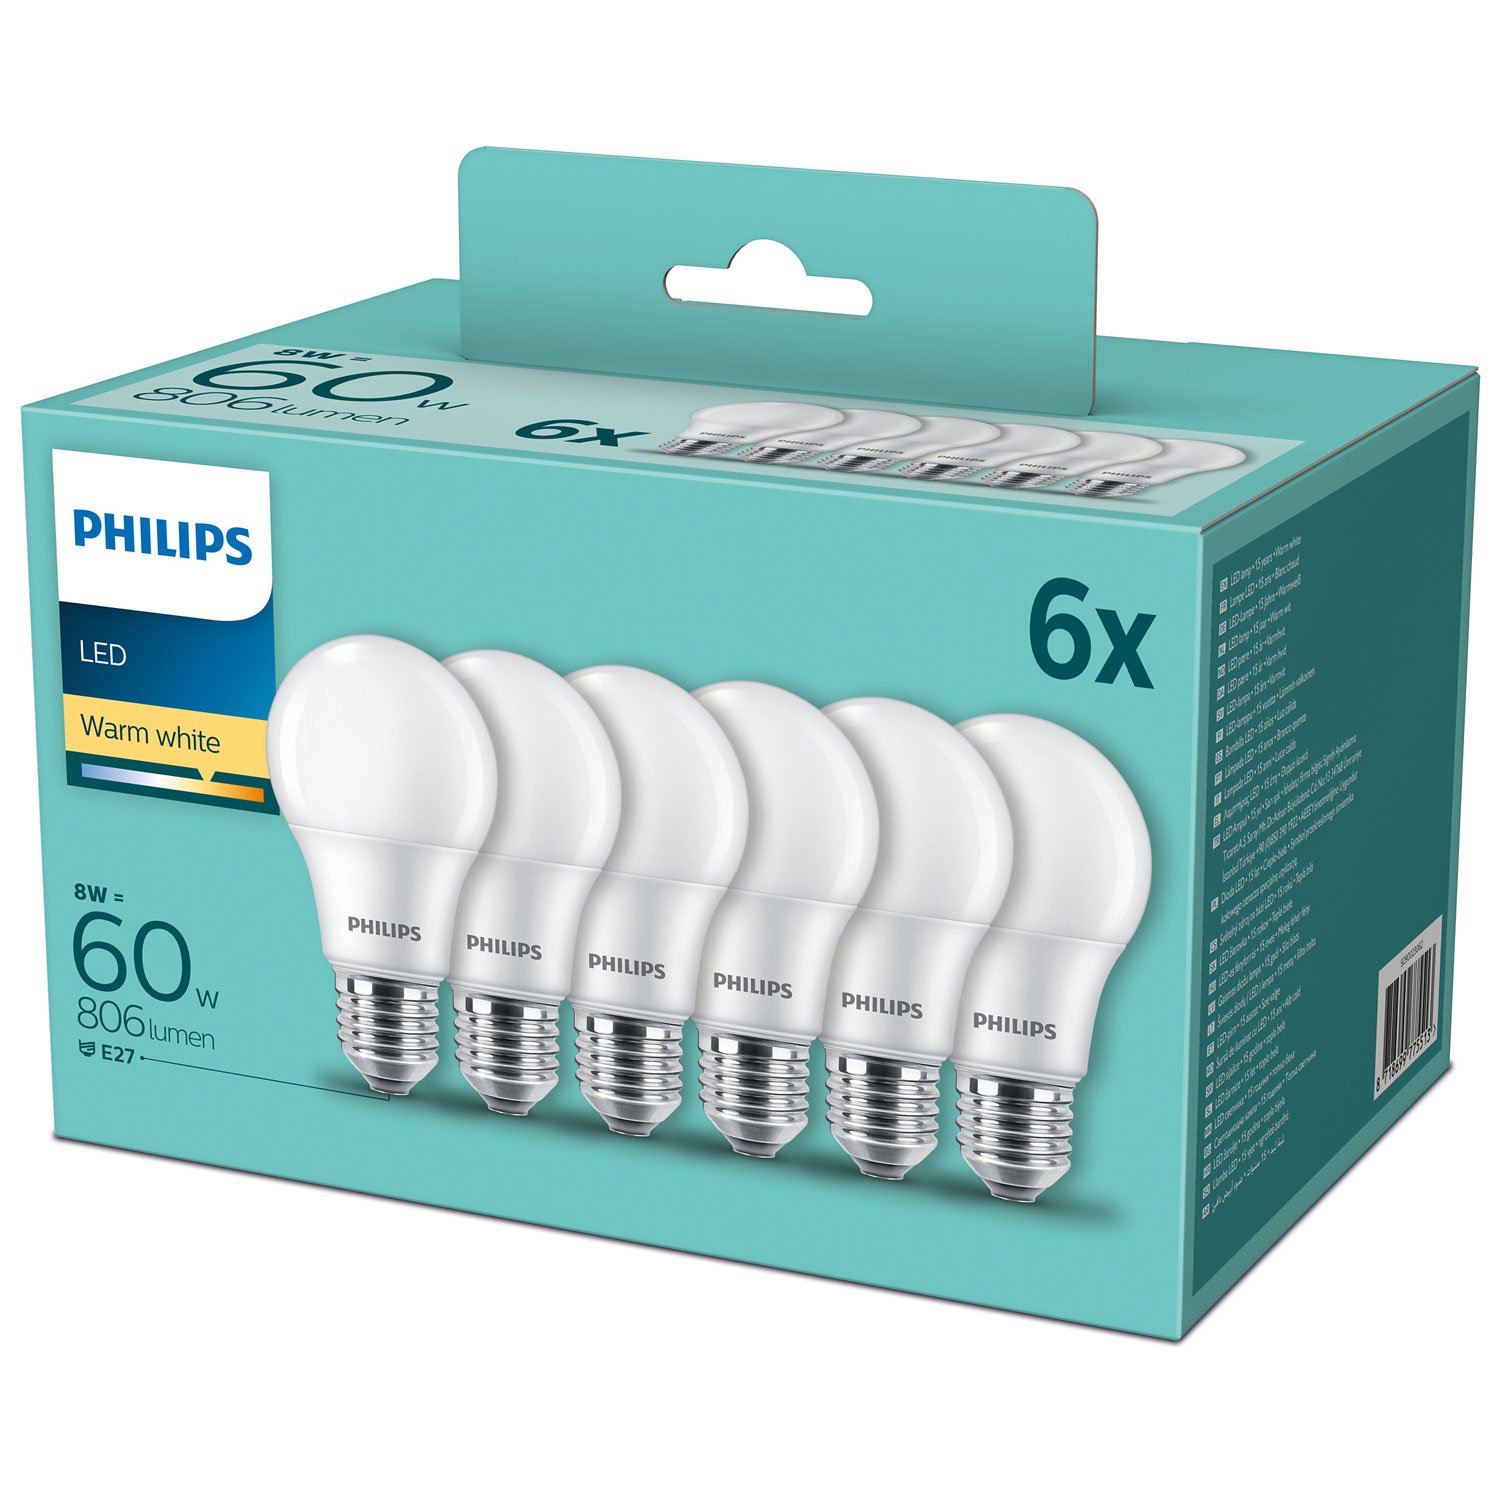 Philips 6-pack LED E27 Normal Frost 60W 806lm